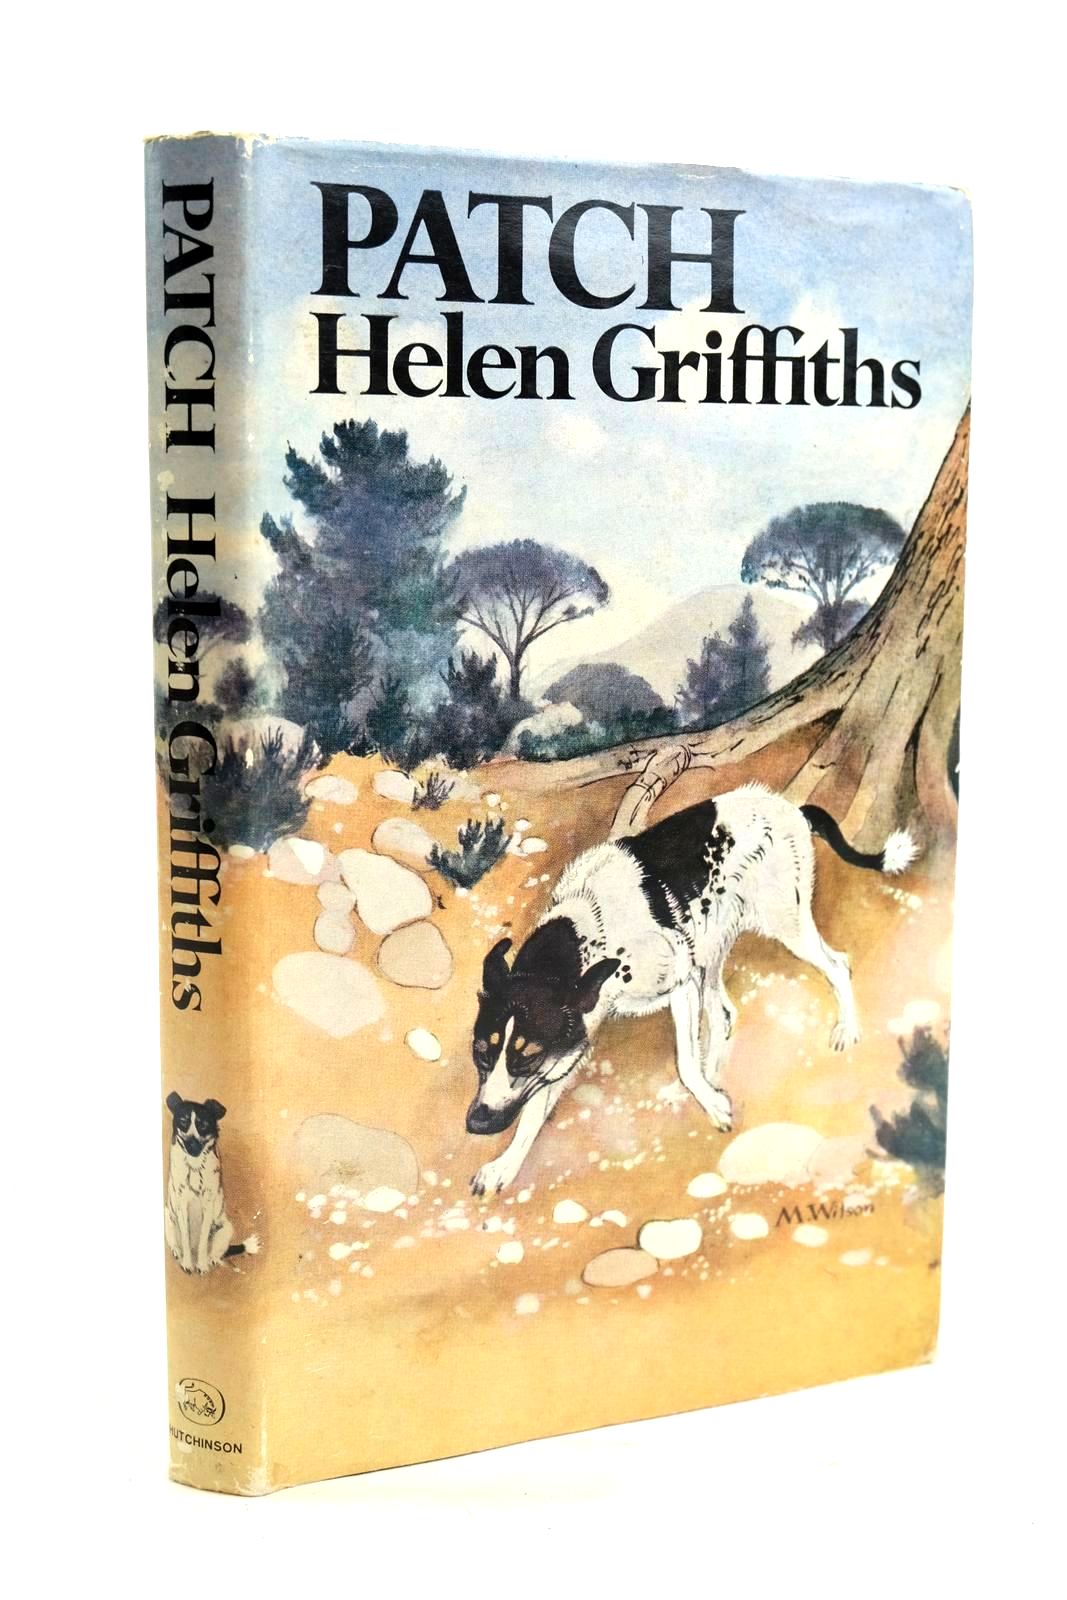 Photo of PATCH written by Griffiths, Helen illustrated by Wilson, Maurice published by Hutchinson of London (STOCK CODE: 1319691)  for sale by Stella & Rose's Books